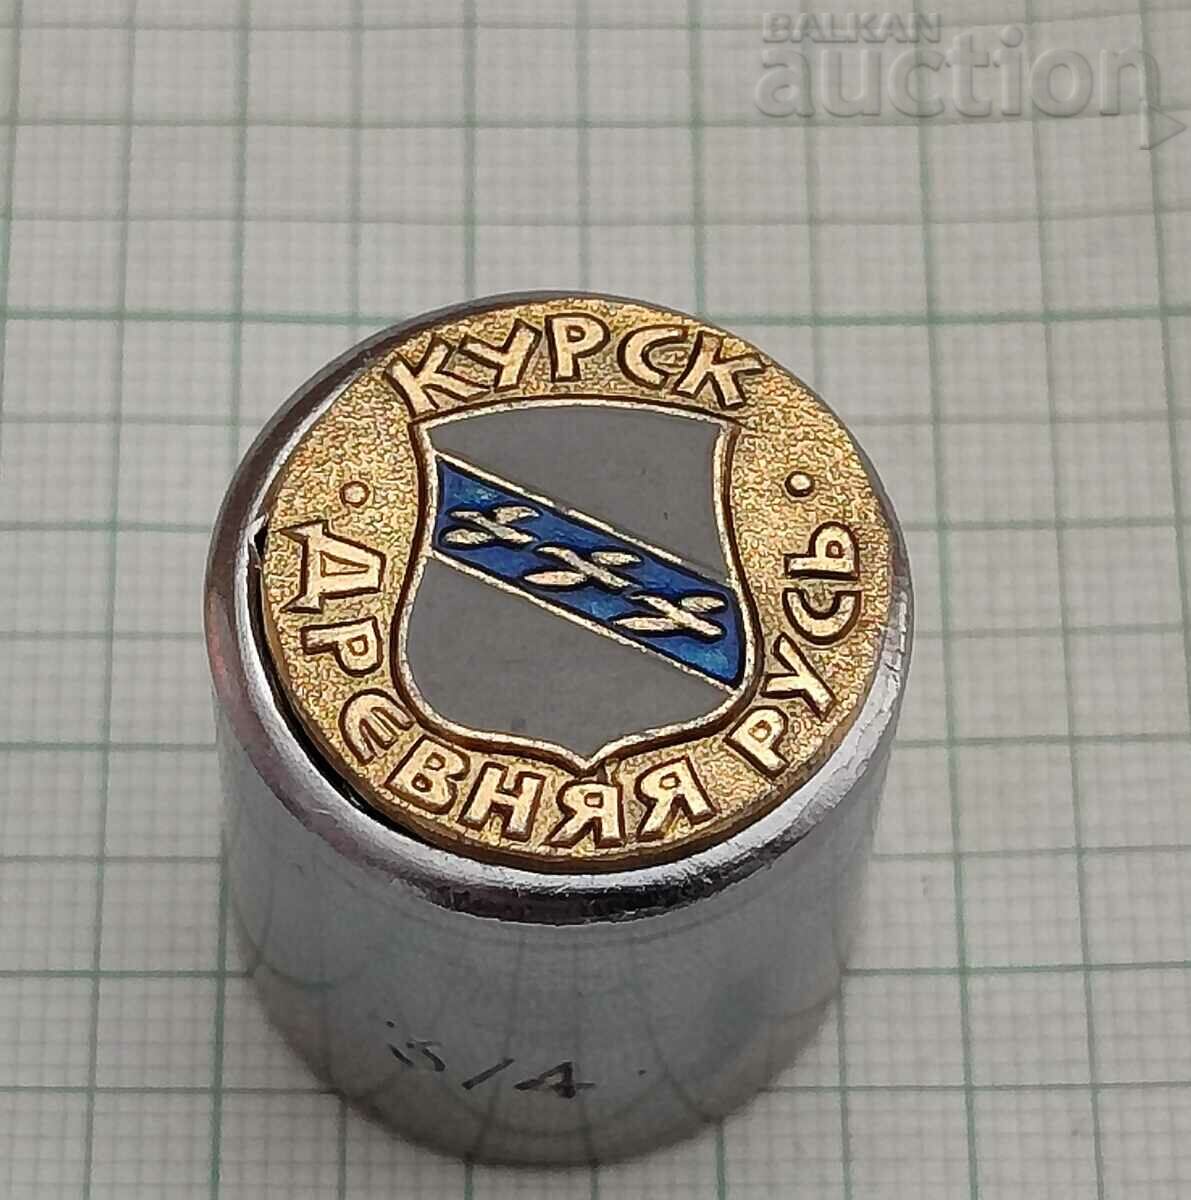 KURSK ANCIENT RUSSIA COAT OF ARMS USSR BADGE